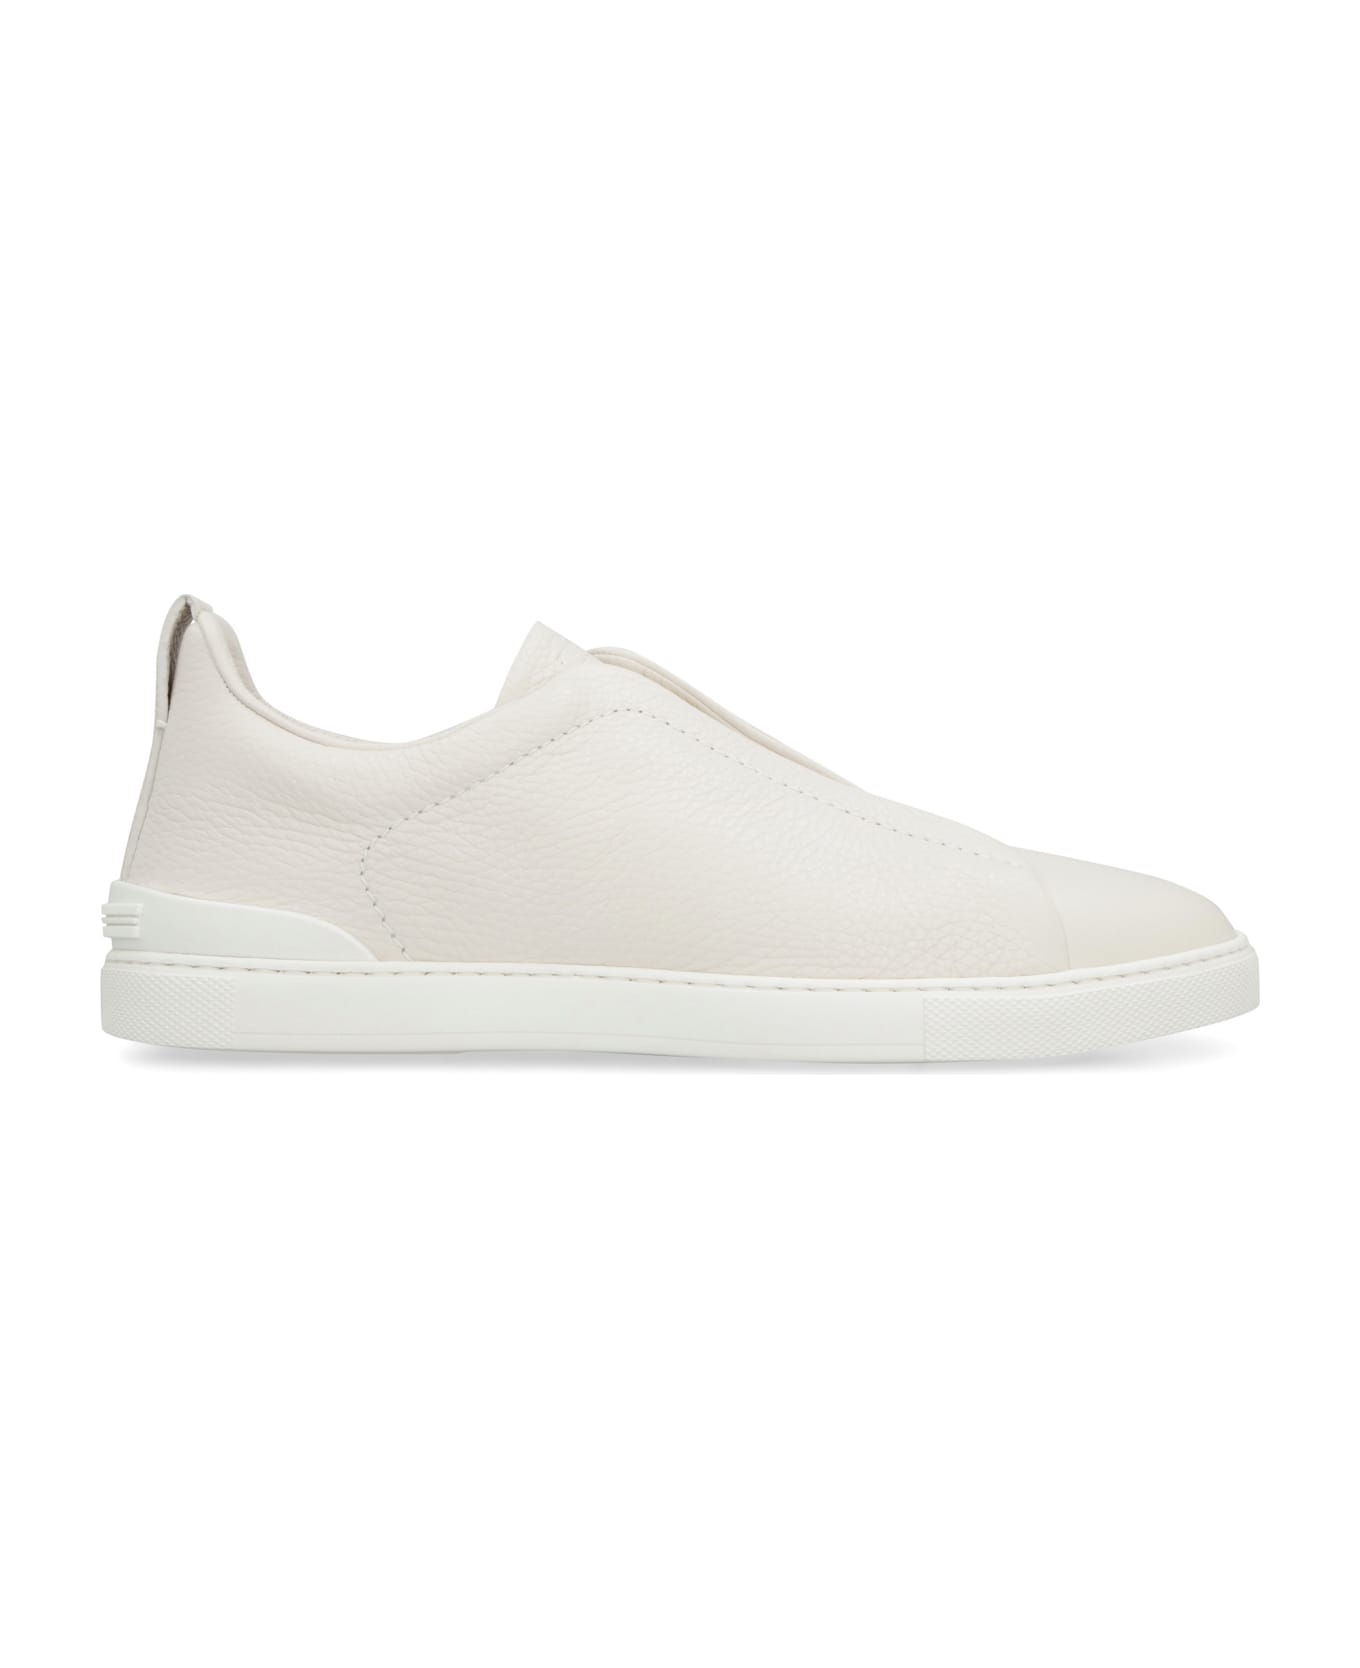 Zegna Triple Stitch Leather Sneakers - Ivory スニーカー